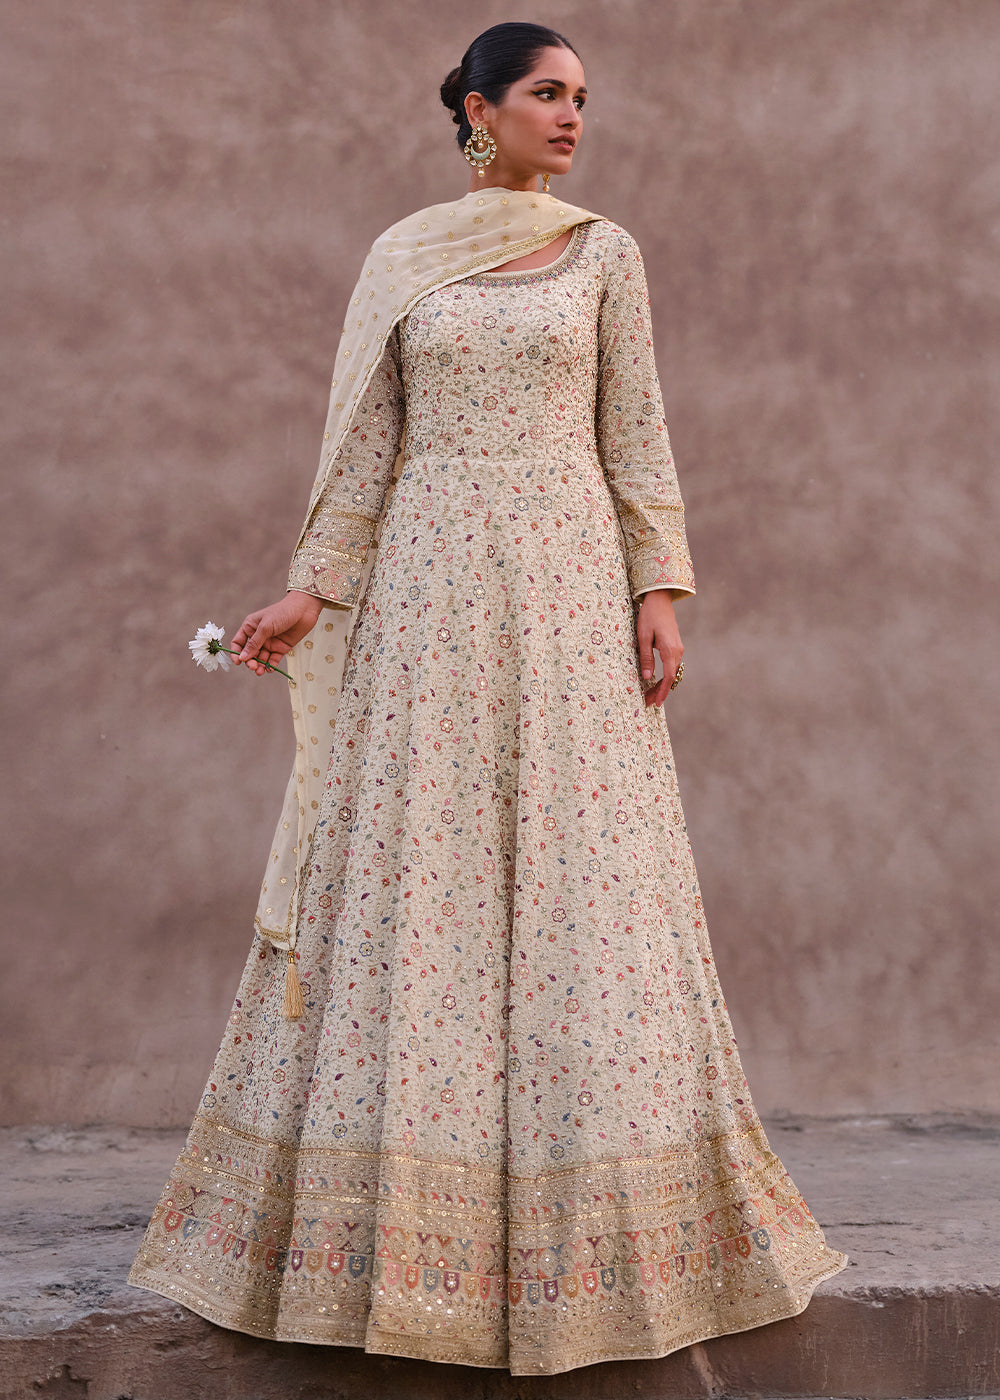 Pearl White Designer Anarkali Suit with Full Embroidery work